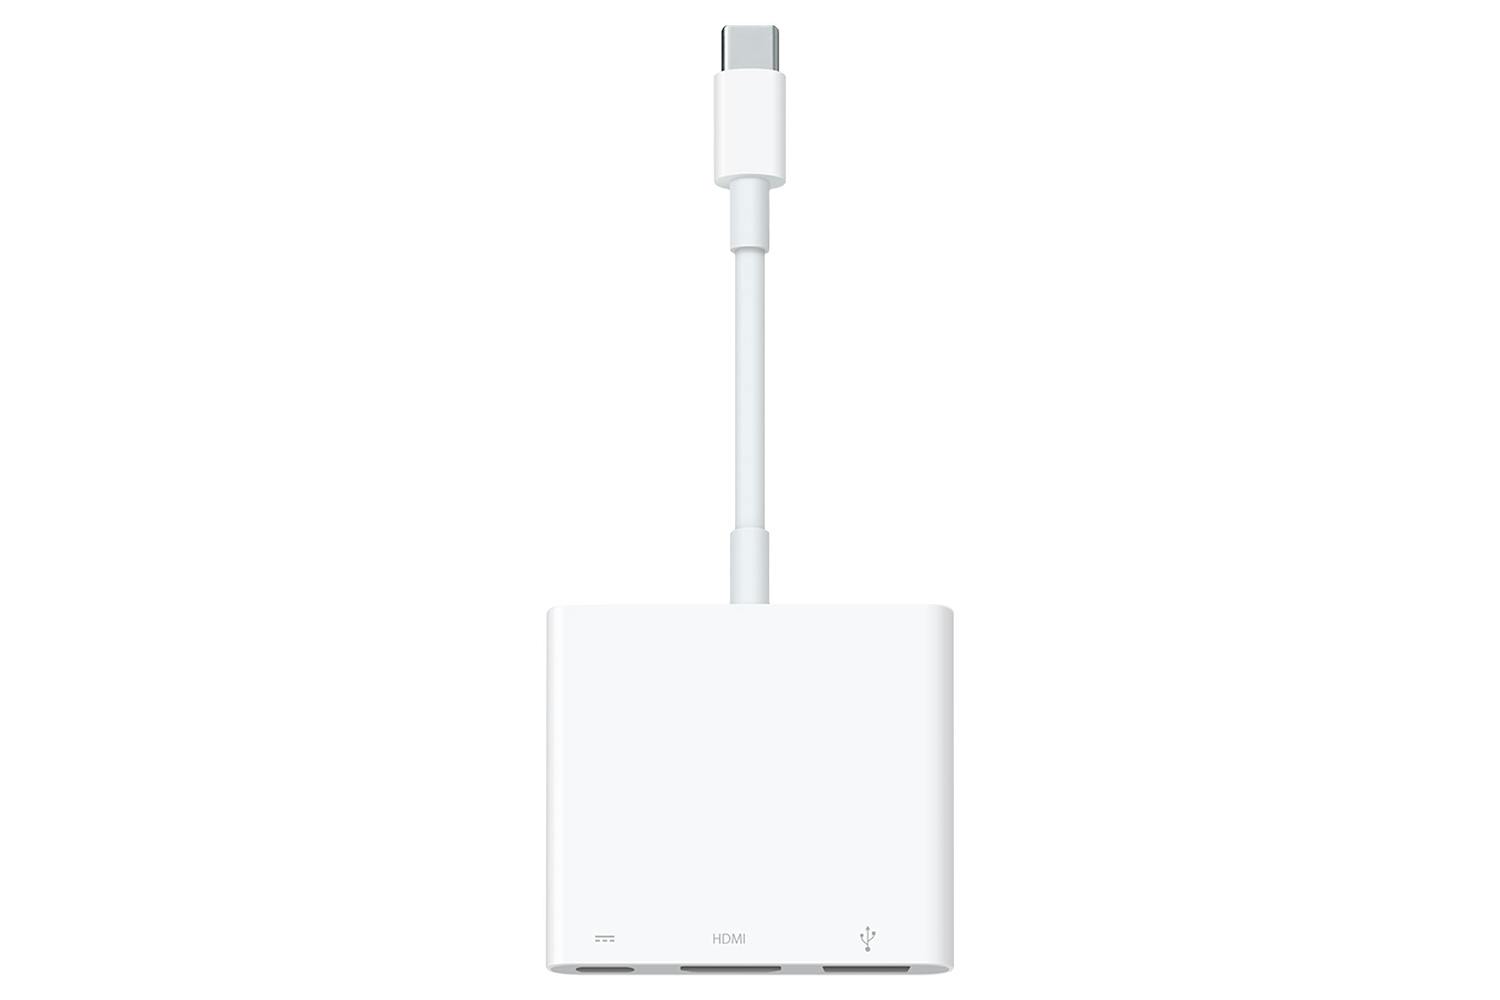 https://hniesfp.imgix.net/8/images/detailed/199/Apple_Accessories_Apple_MUF82ZMA.jpg?fit=fill&bg=0FFF&w=1500&h=1000&auto=format,compress